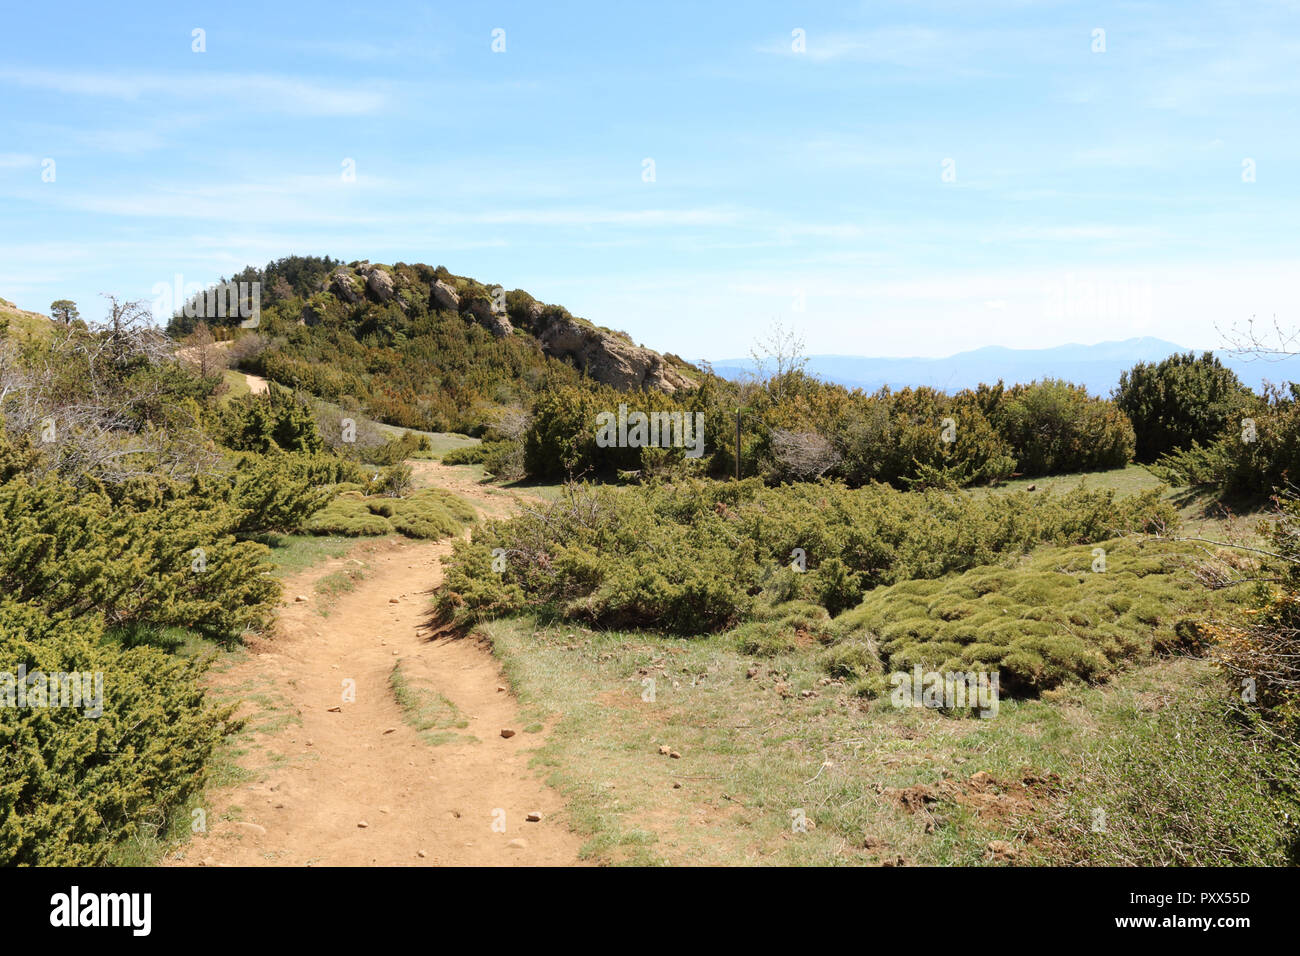 A landscape of a path on the edge of Peña Oroel mount, with the Pyrenees as background, a wide valley with blue sky and some bushes, in Aragon, Spain Stock Photo